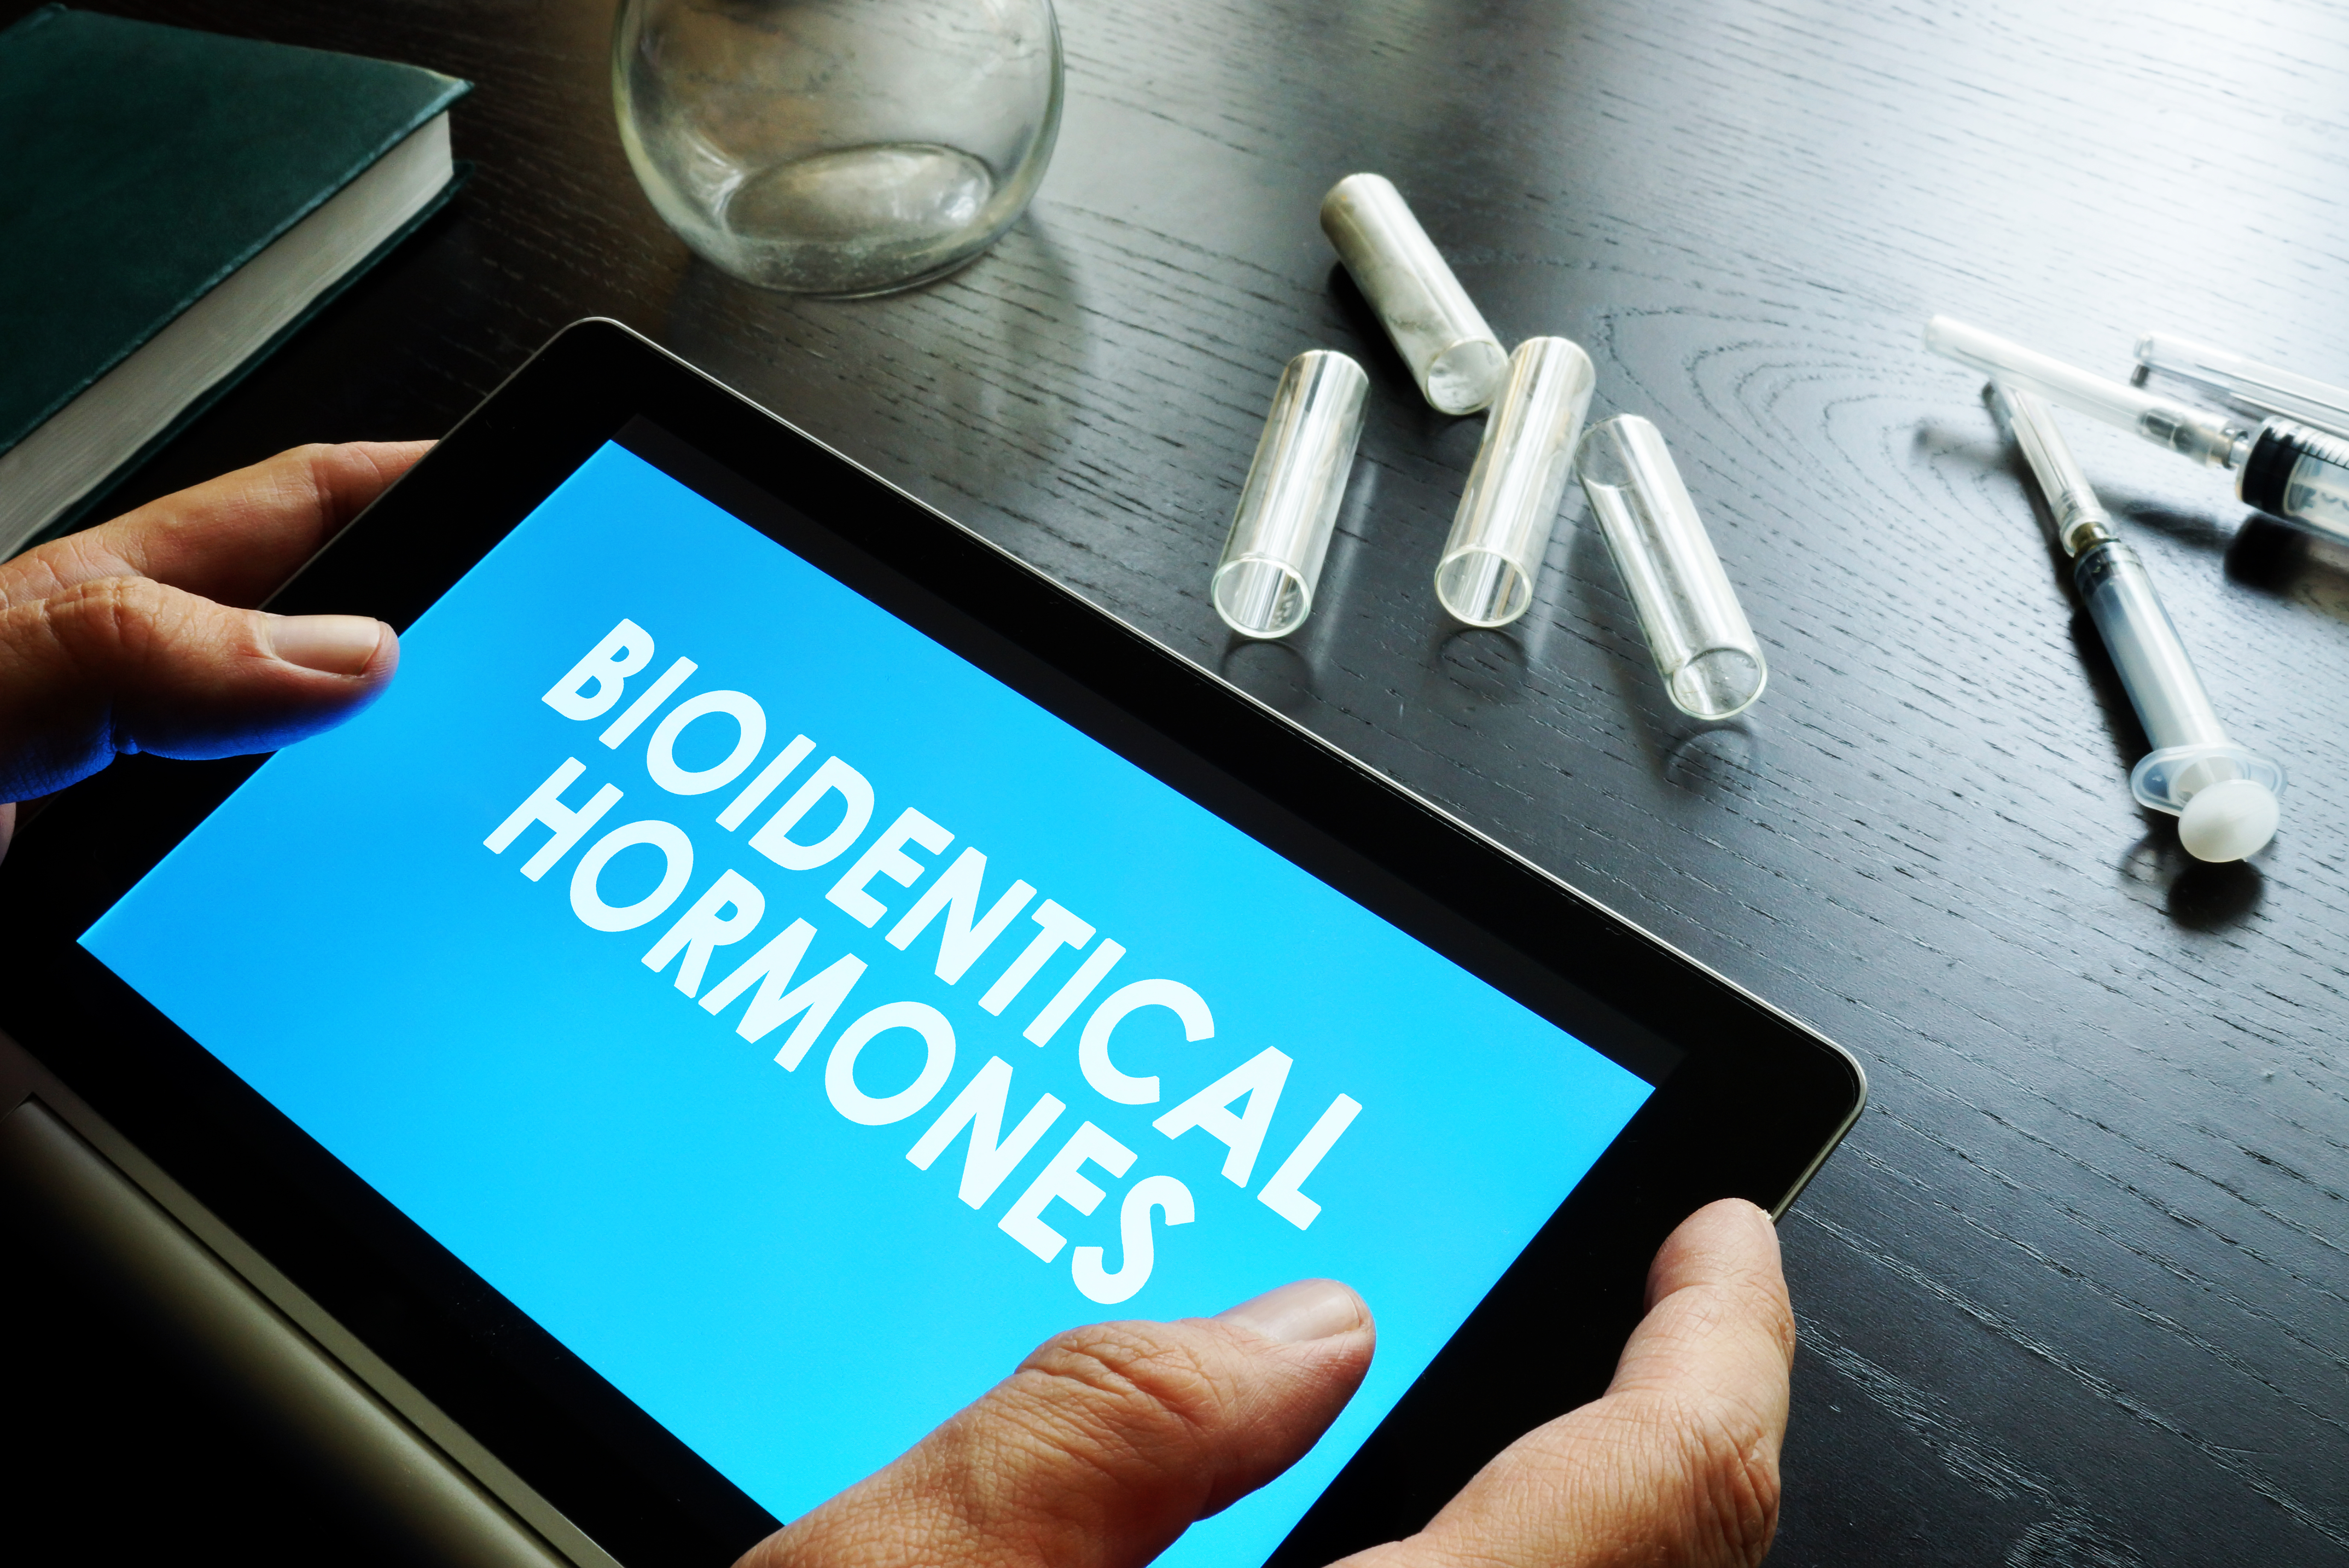 Bioidentical hormones. Doctor holding tablet with sign.